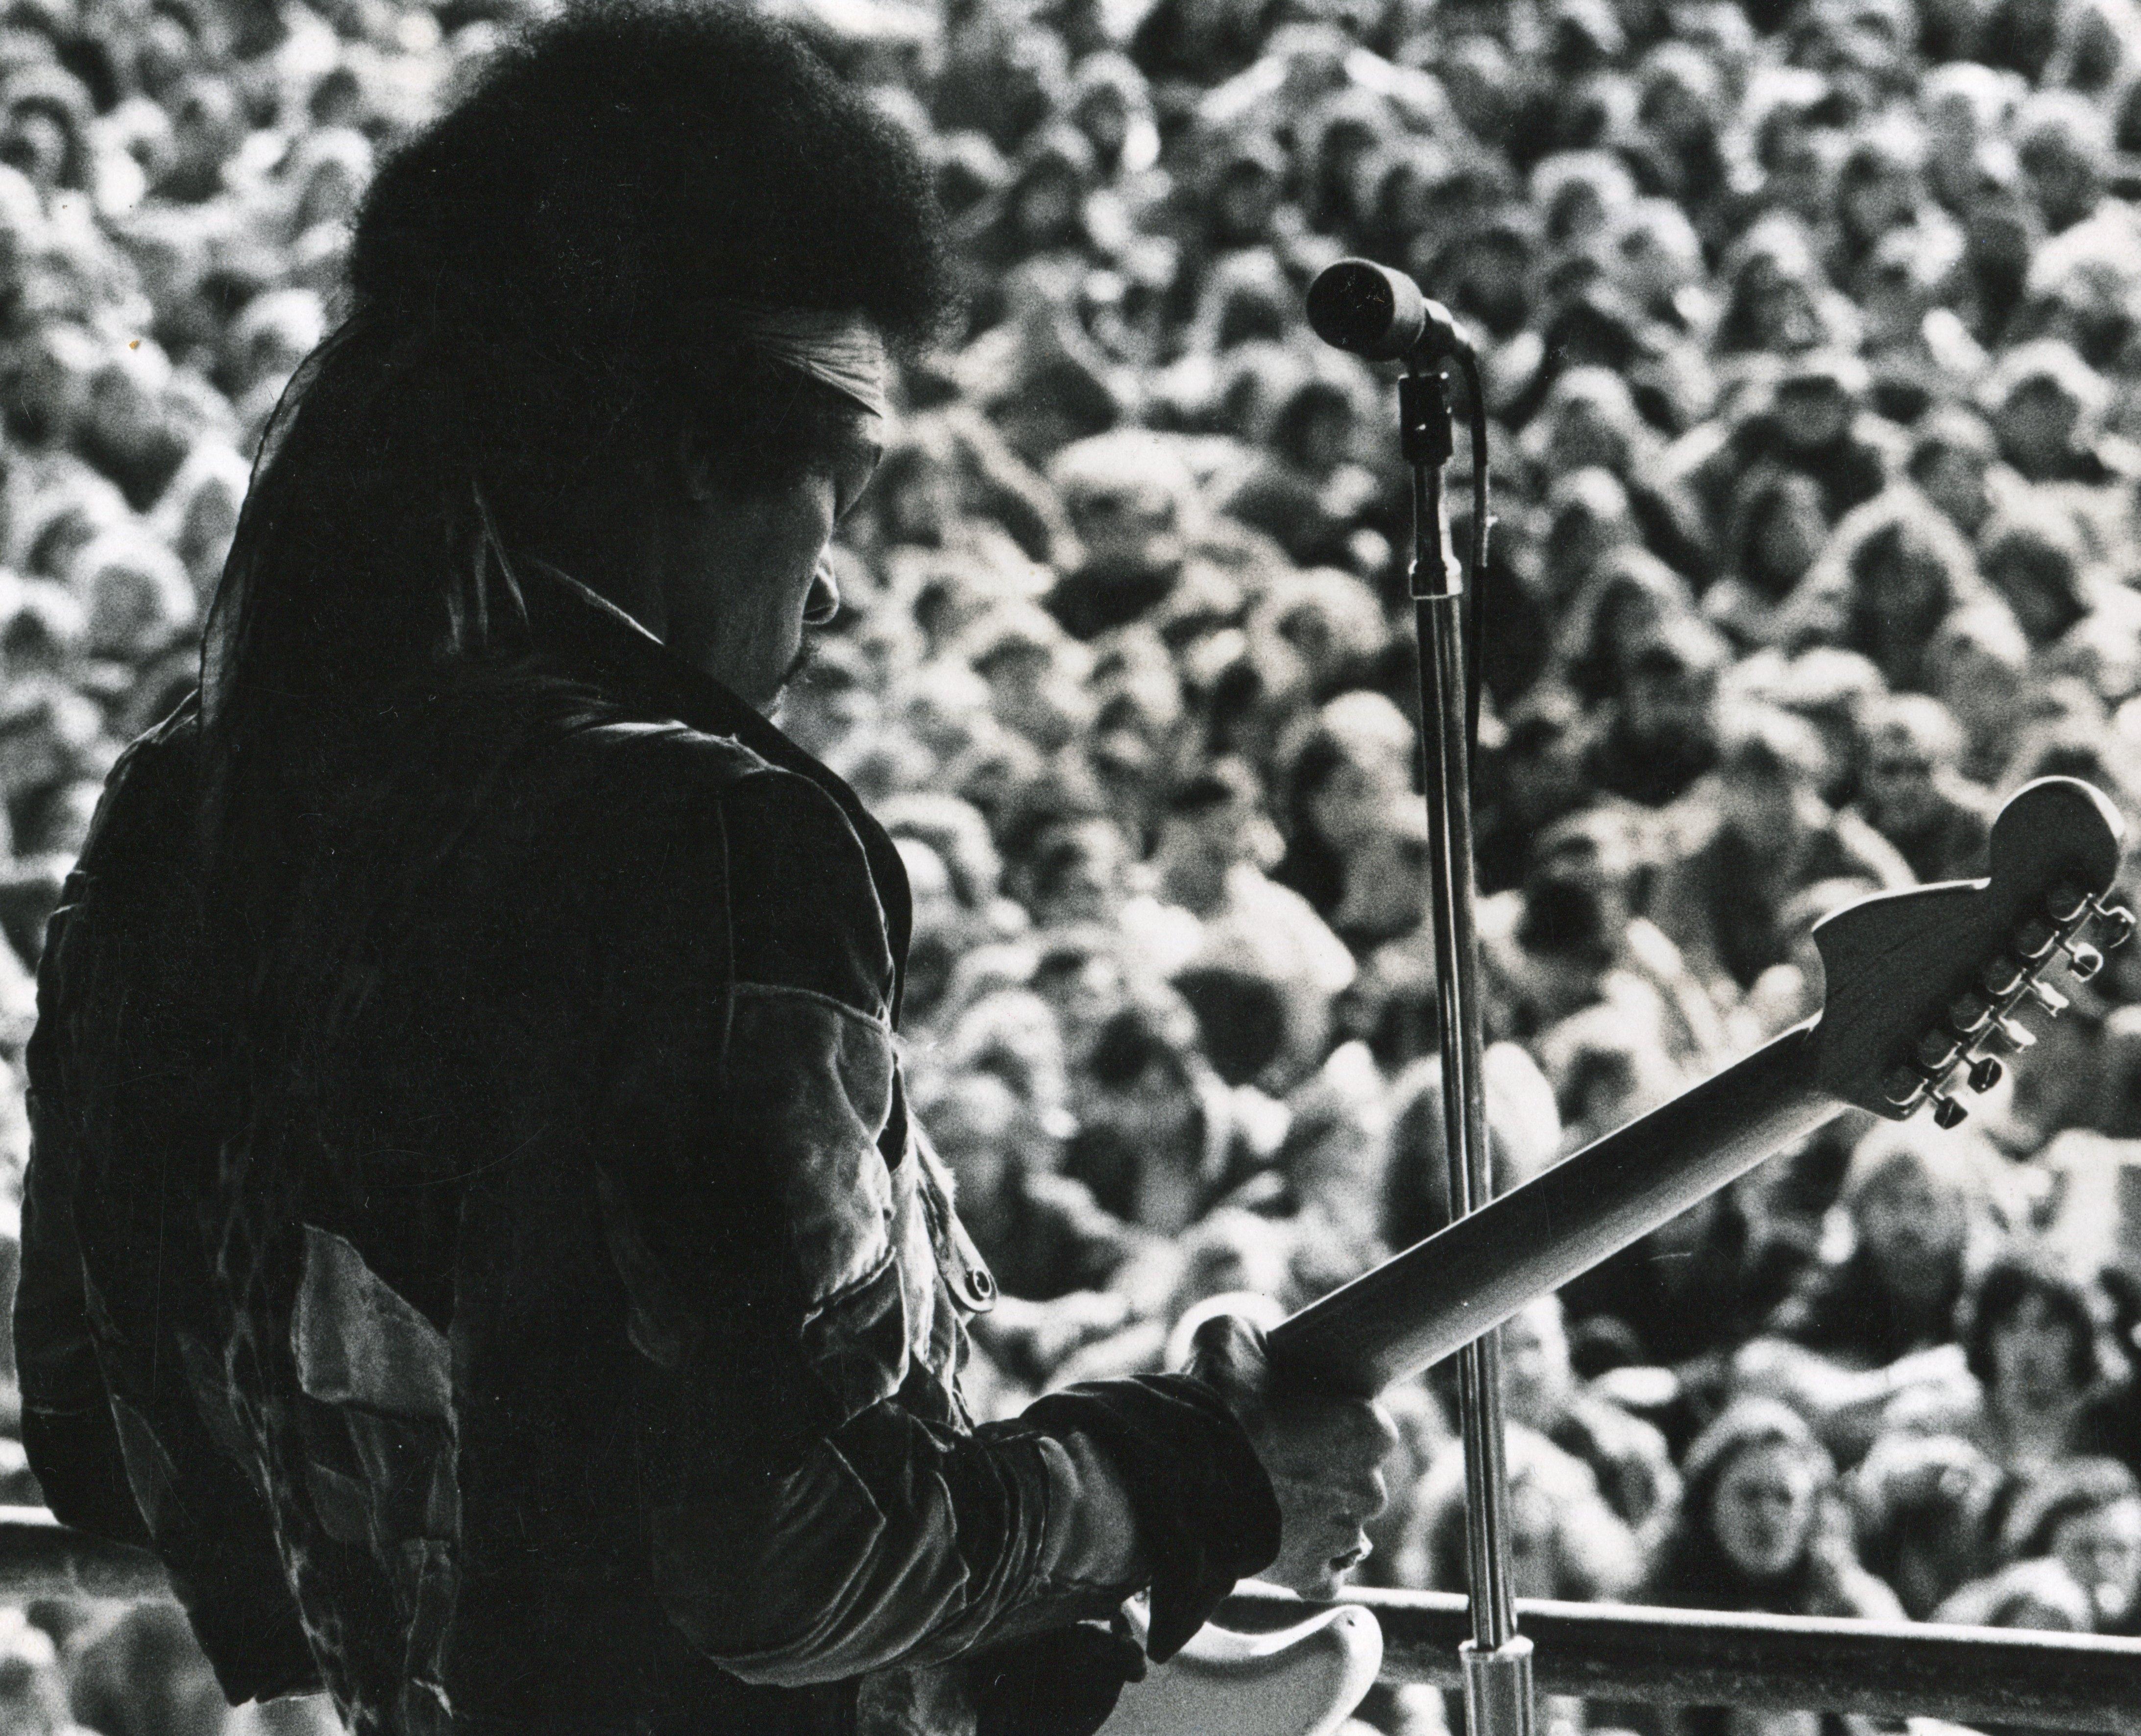 Dieter Preiss Black and White Photograph - Jimi Hendrix live in concert